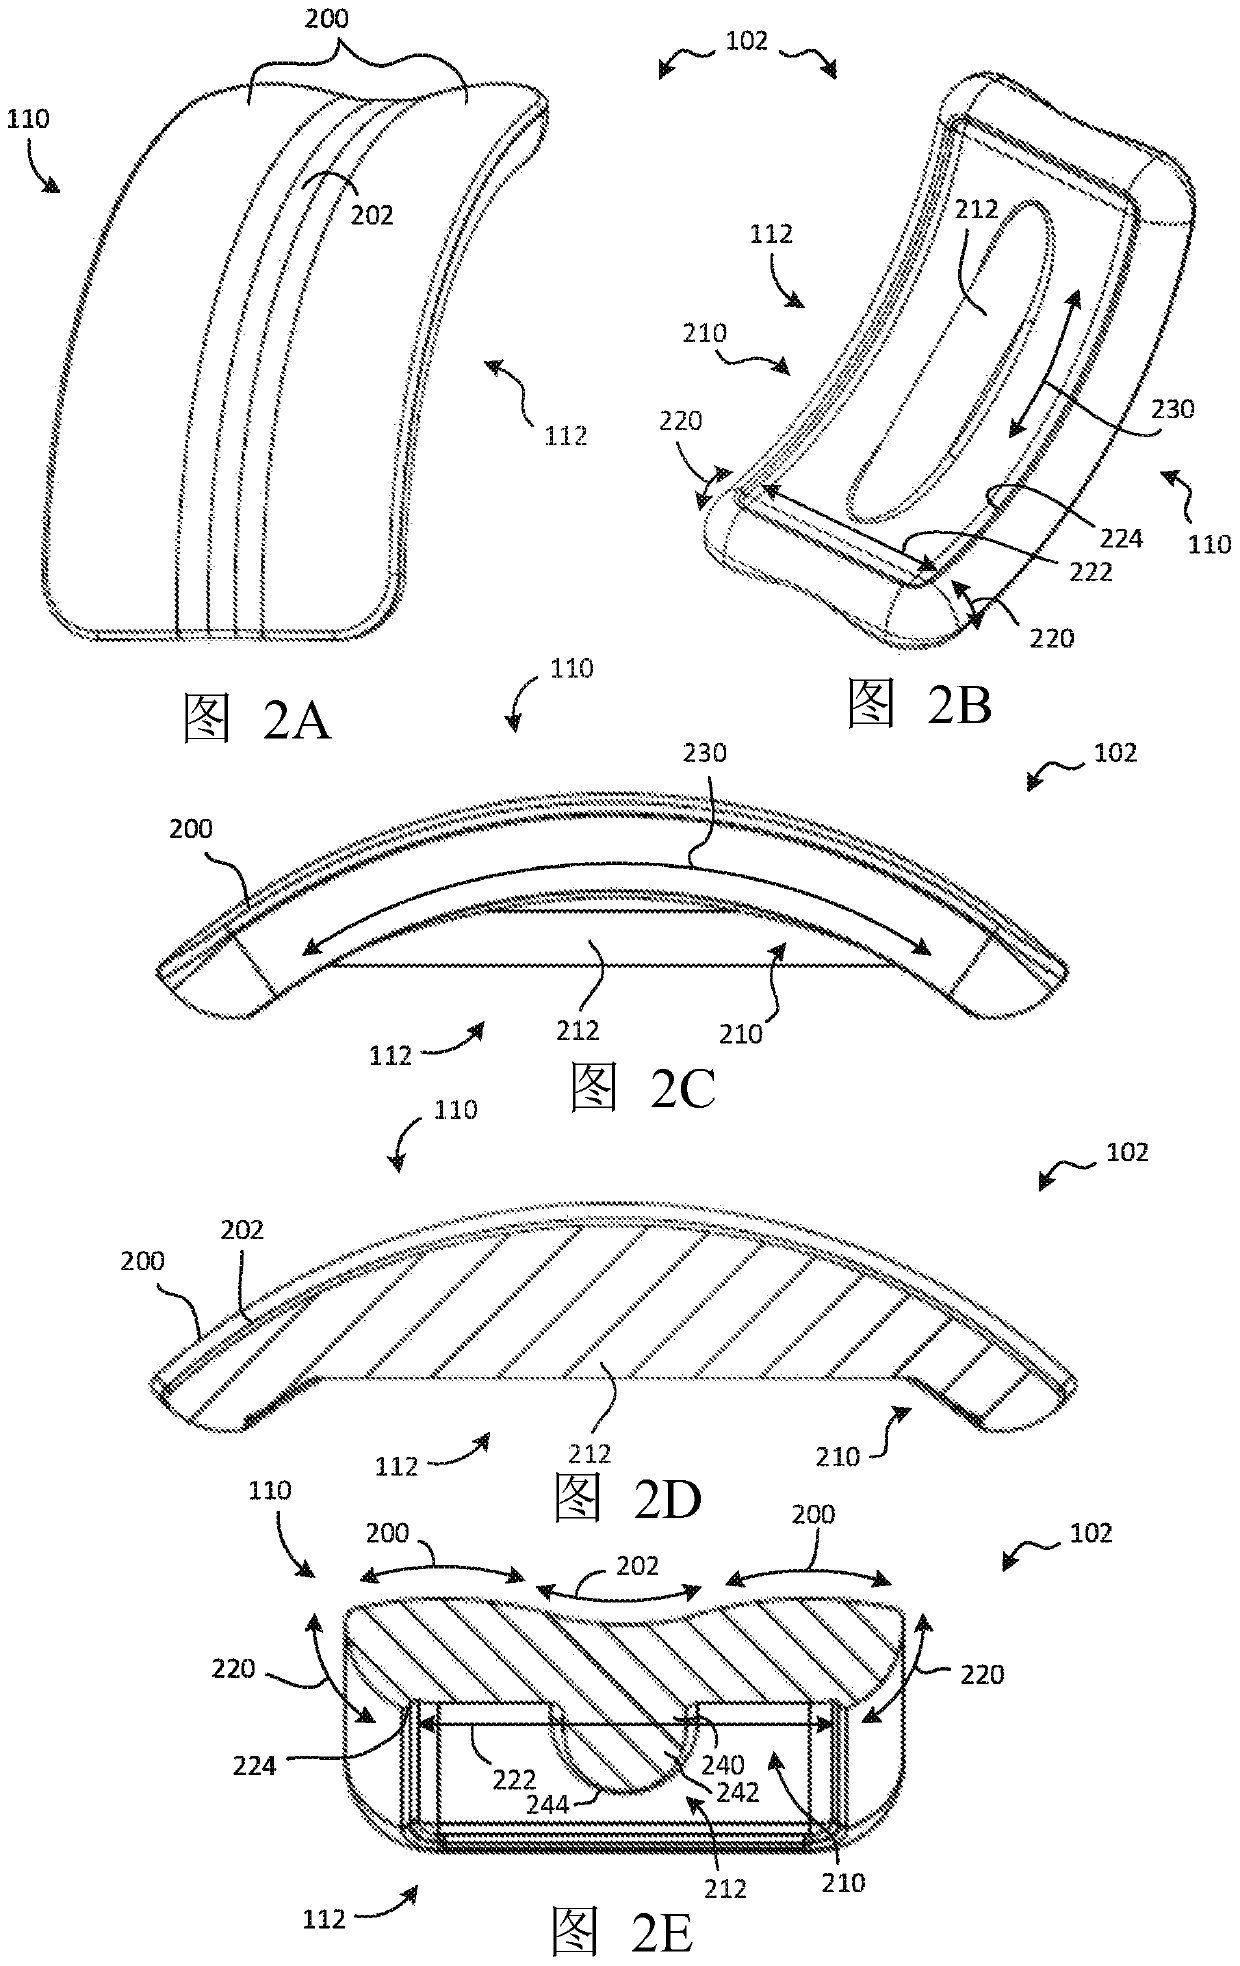 Ankle arthroplasty systems and methods